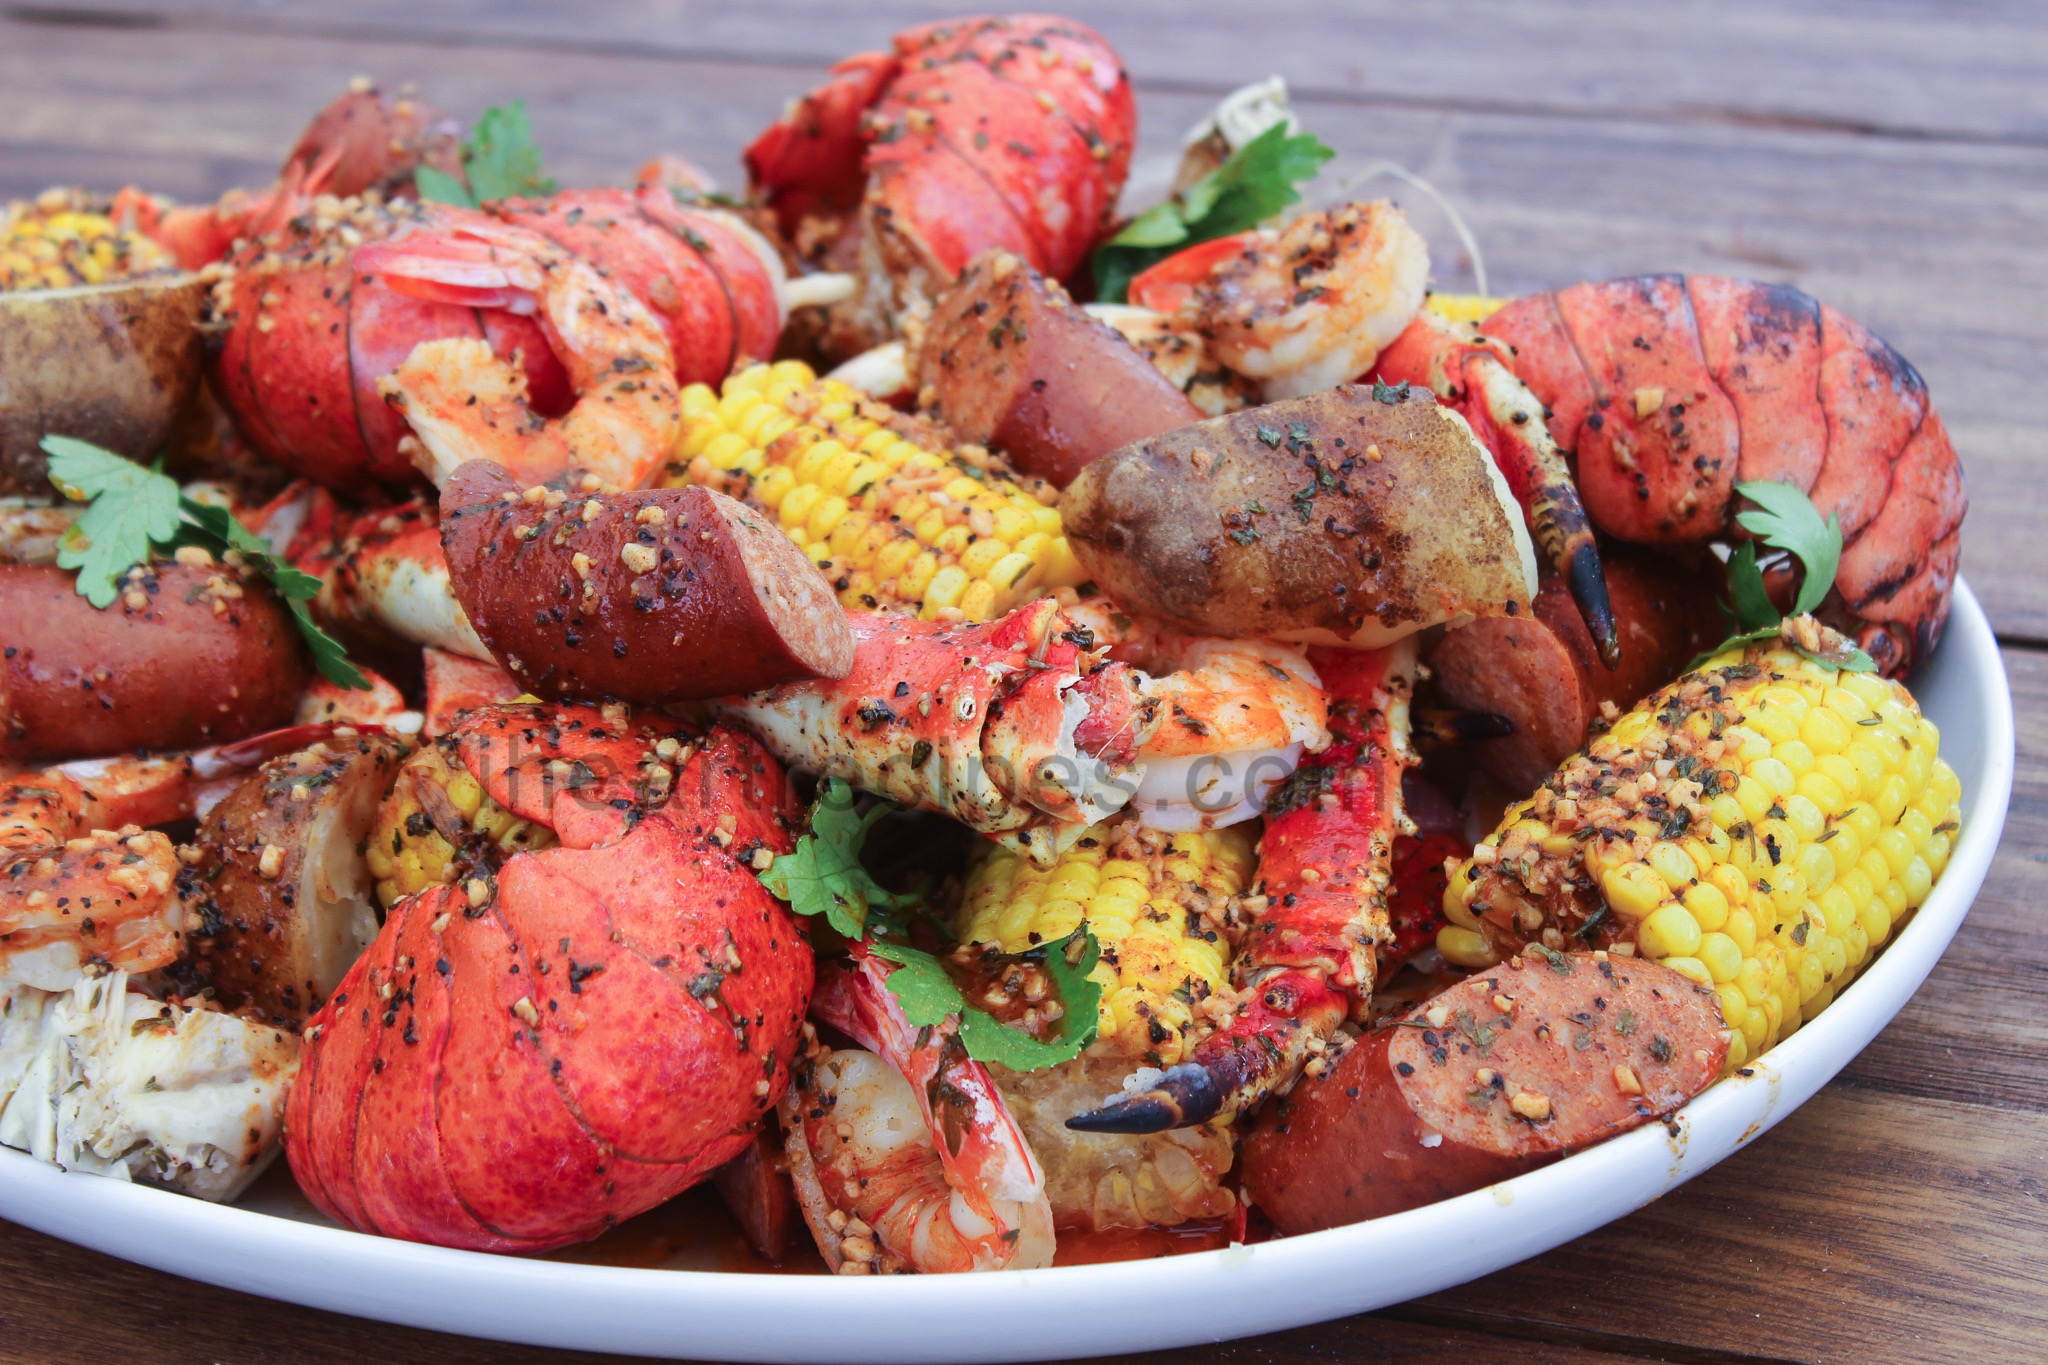 A platterful of lobster, crab, shrimp, corn, and potatoes covered in zesty garlic butter. This homemade seafood boil has all your favorite seafood and Creole flavors.